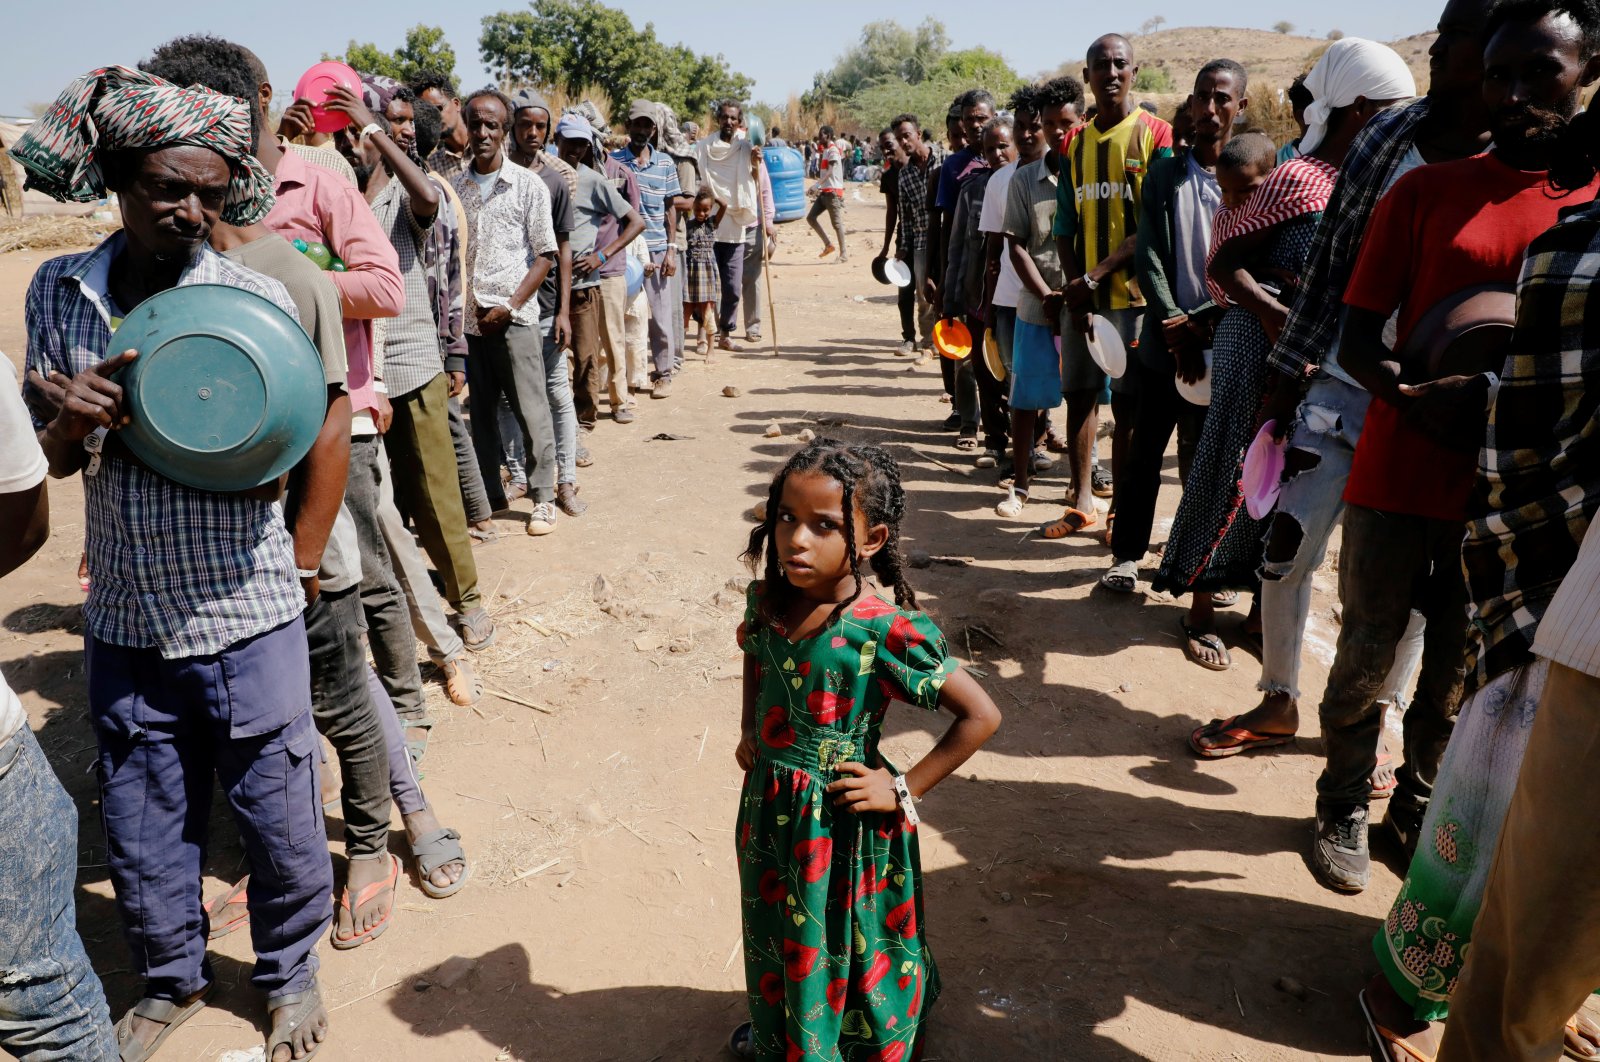 Ethiopian refugees wait in lines for a meal at the Um Rakuba refugee camp which houses Ethiopian refugees fleeing the fighting in the Tigray region, on the Sudan-Ethiopia border, Sudan, Nov. 28, 2020. (Reuters Photo)